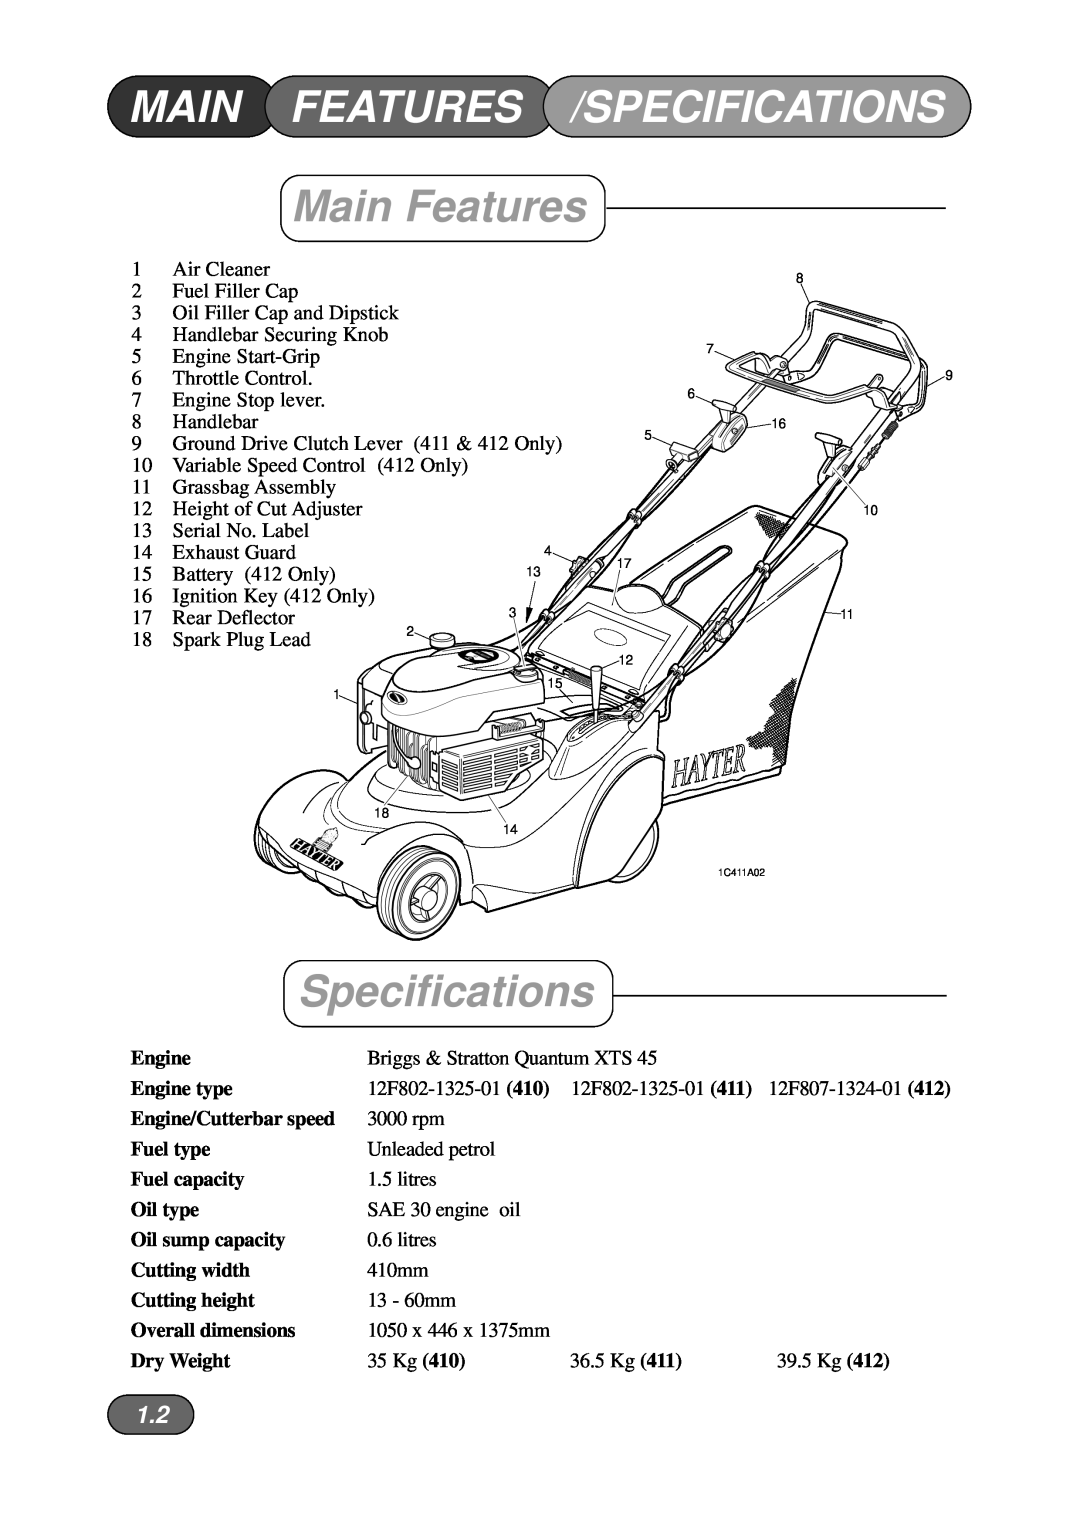 Briggs & Stratton Harrier 41 manual Main Features /Specifications 